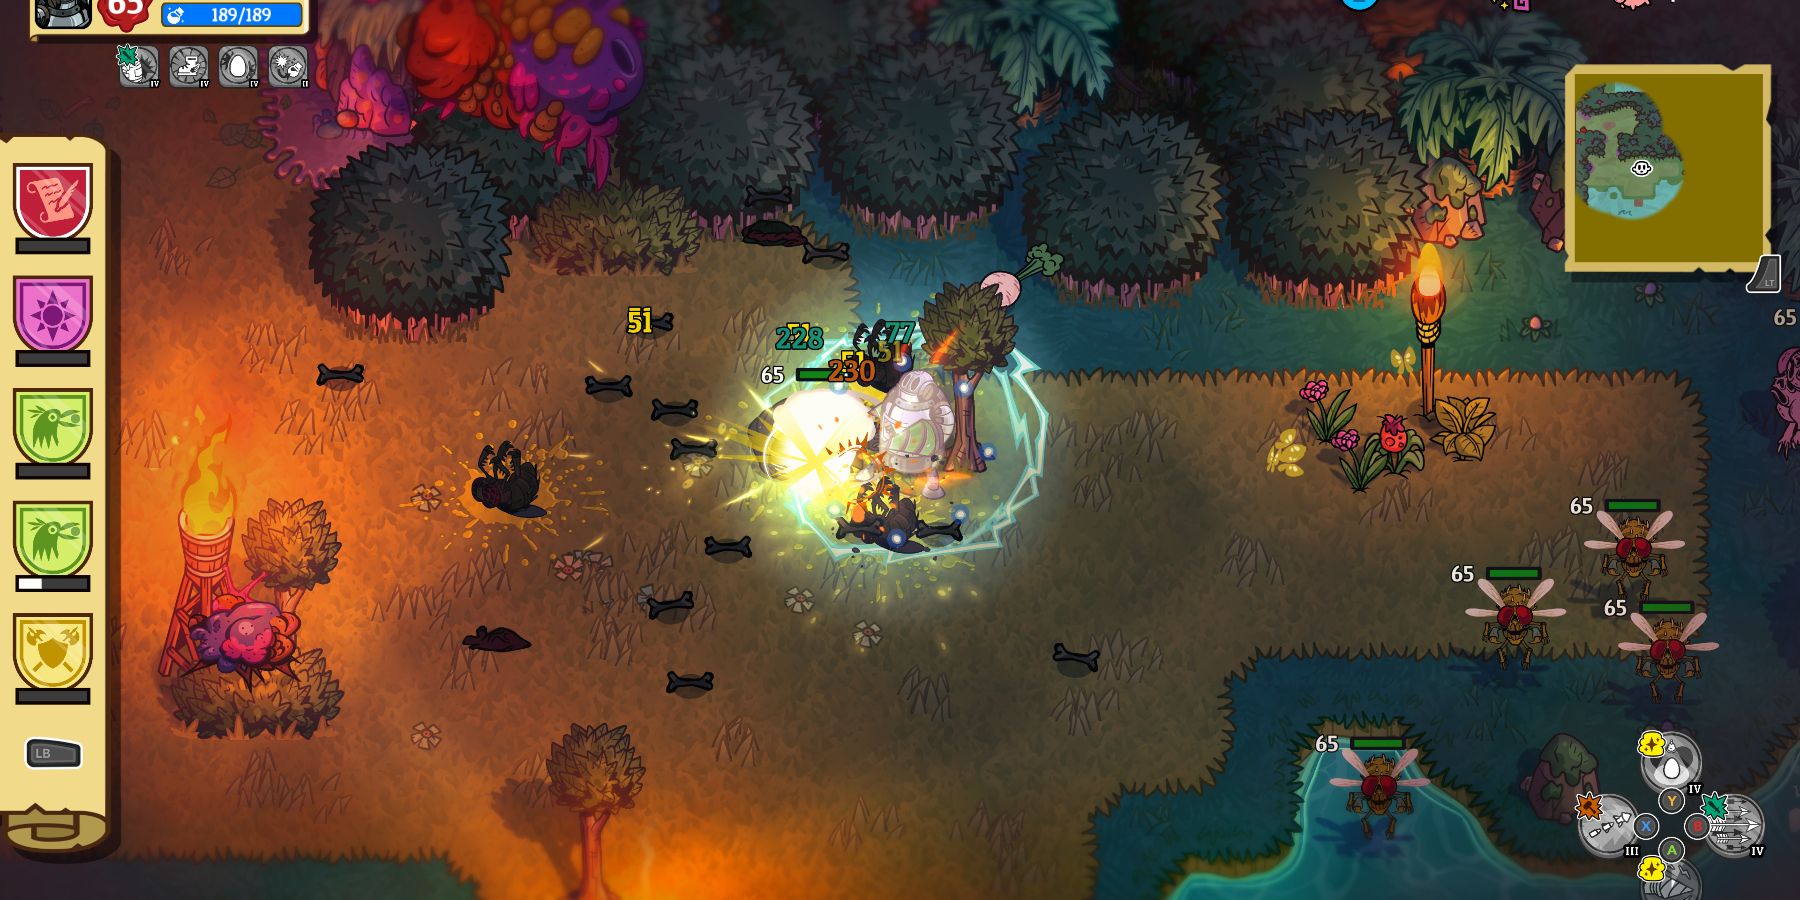 a robot emits a green circle of electricity that damages nearby enemies. Orange and green damage numbers hover over their heads. the environment is green and lush, with flower, trees, bushes, and lit torches. in the bottom right corner another waits group of flying, insect-like enemies